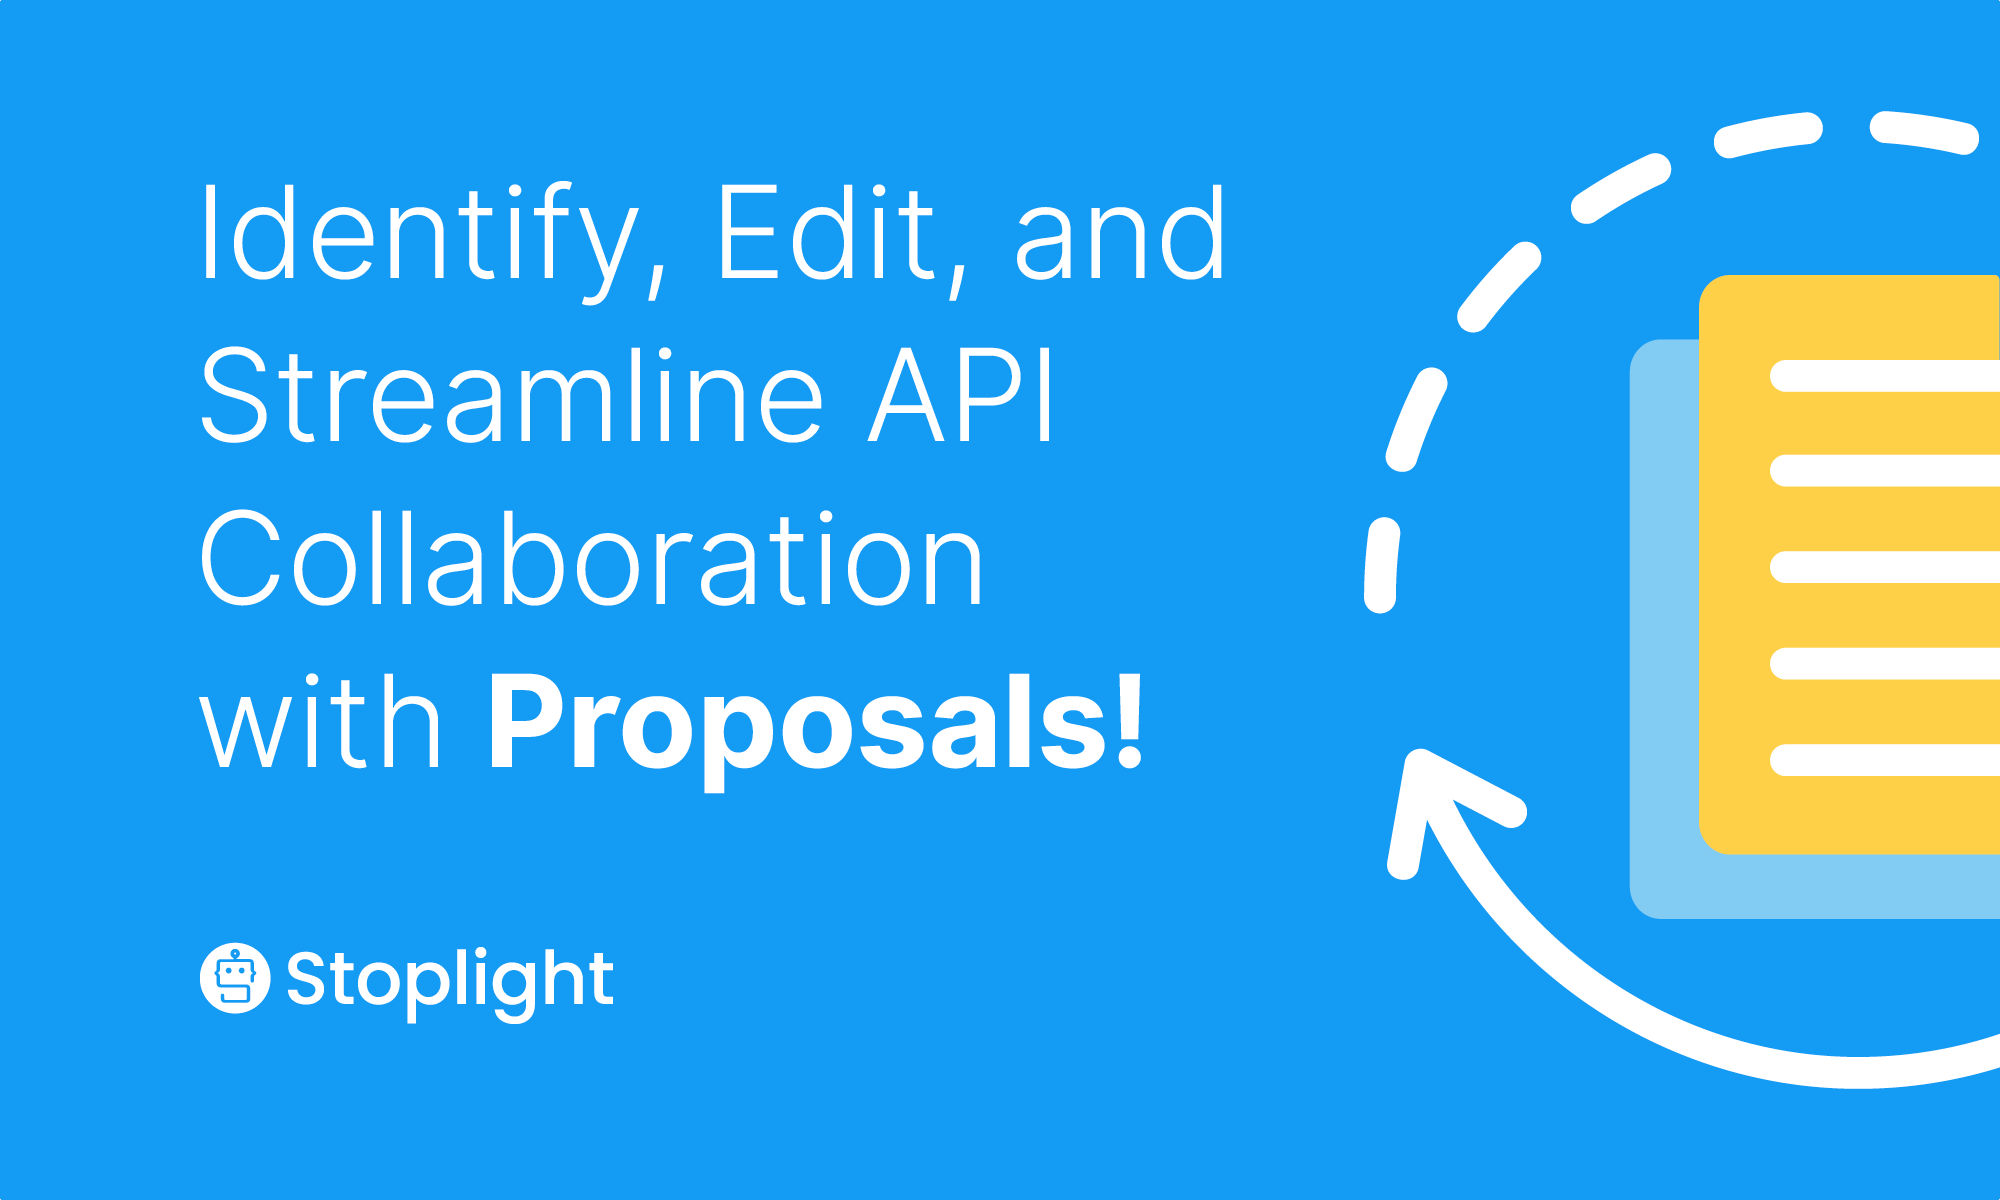 Identify, Edit, and Streamline API Collaboration with Proposals!